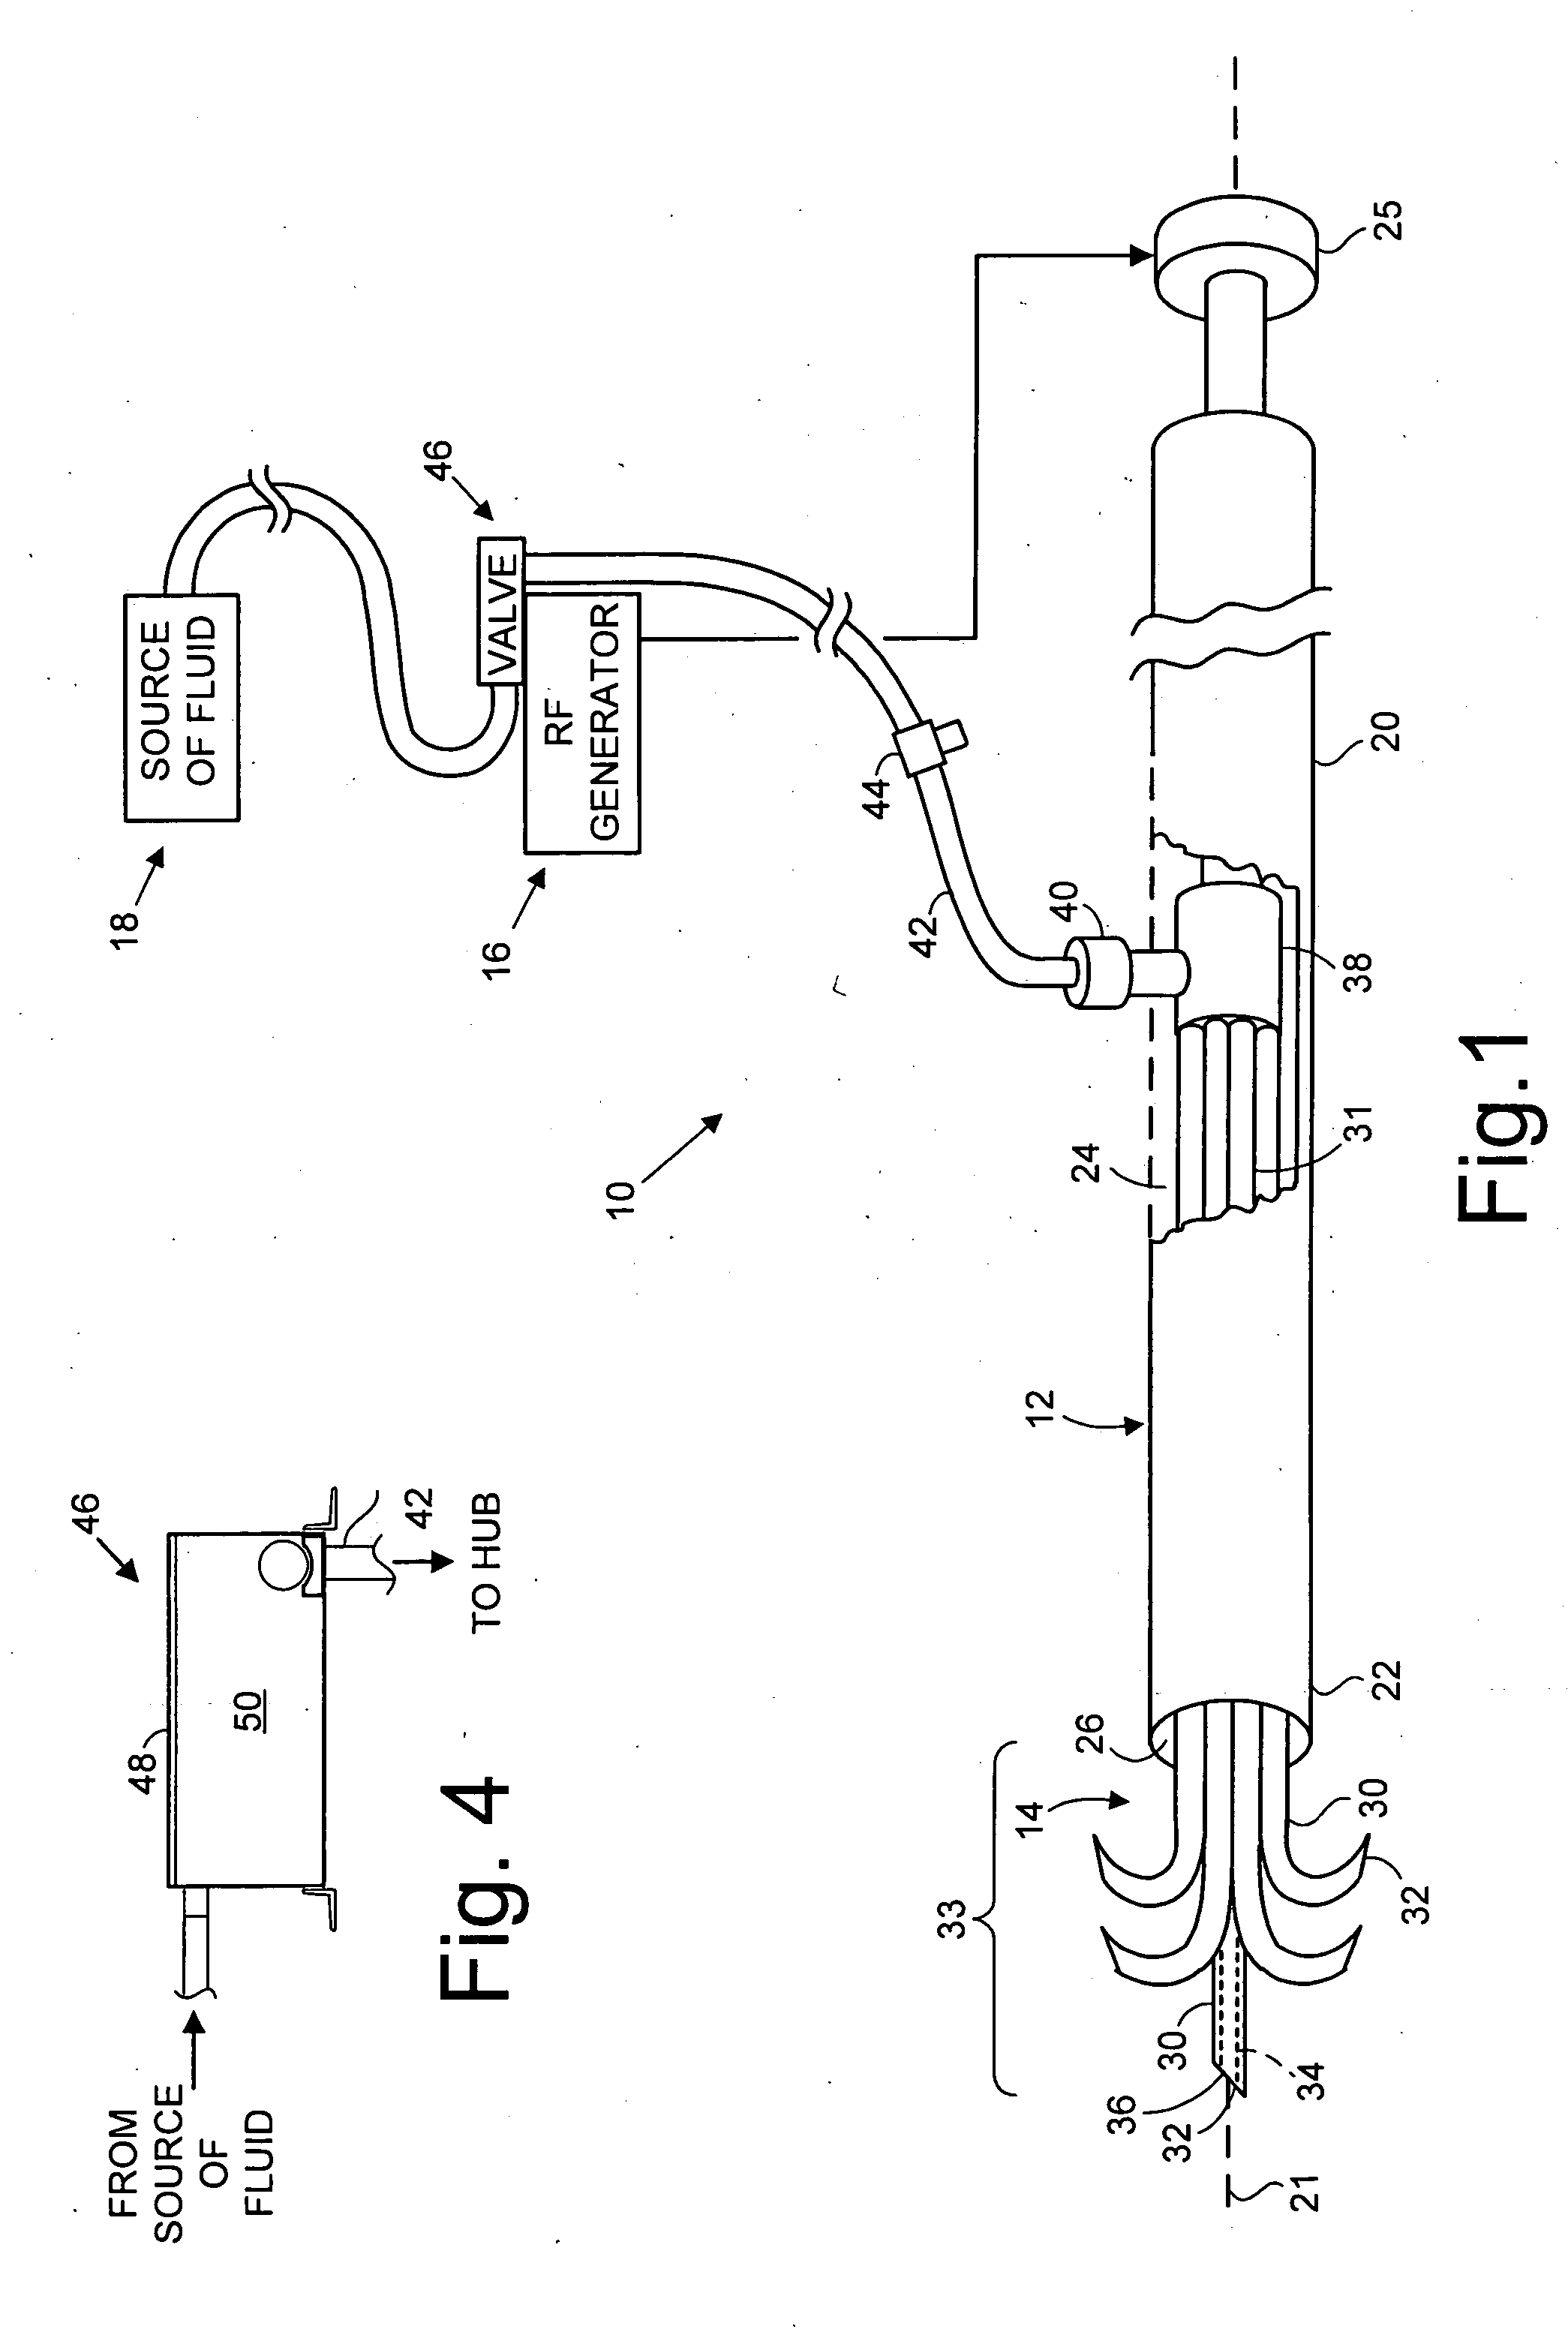 Liquid infusion apparatus for radiofrequency tissue ablation